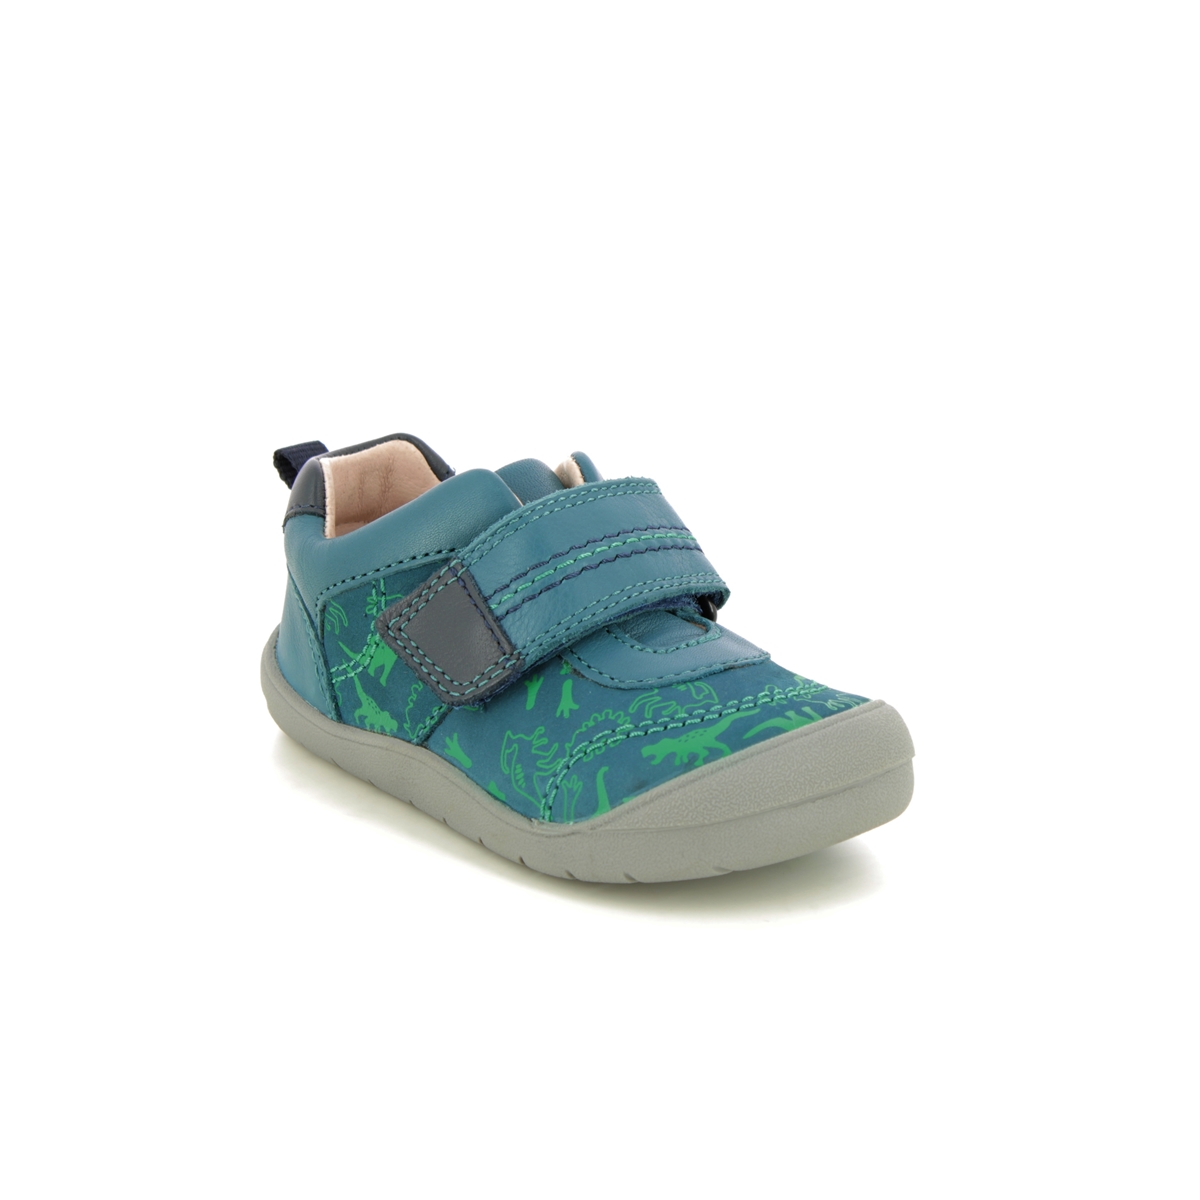 Start Rite Footprint Teal blue Kids Boys Toddler Shoes 0769-46F in a Plain Leather in Size 6.5